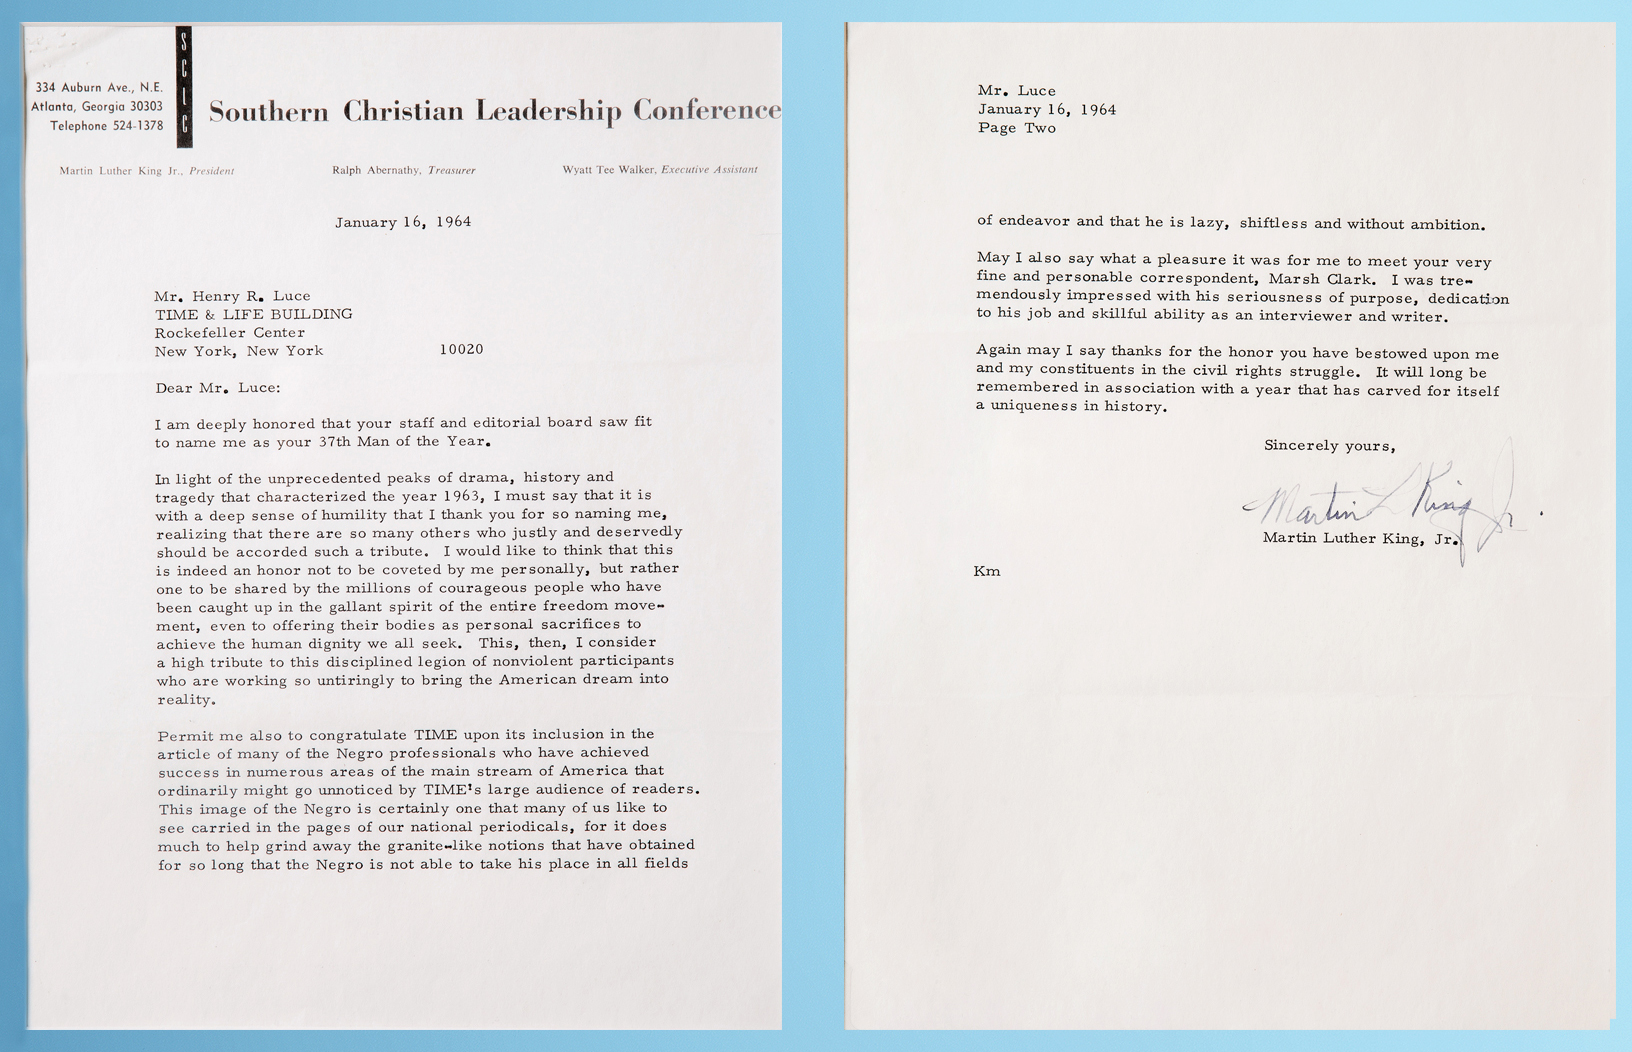 Martin Luther King, Jr. wrote this letter thanking Henry Luce for TIME's decision to name the civil rights leader as the Man of the Year in 1963. The March on Washington had just taken place that August, where Rev. King, TIME's first black Person of the Year, delivered the famous “I Have a Dream” speech.